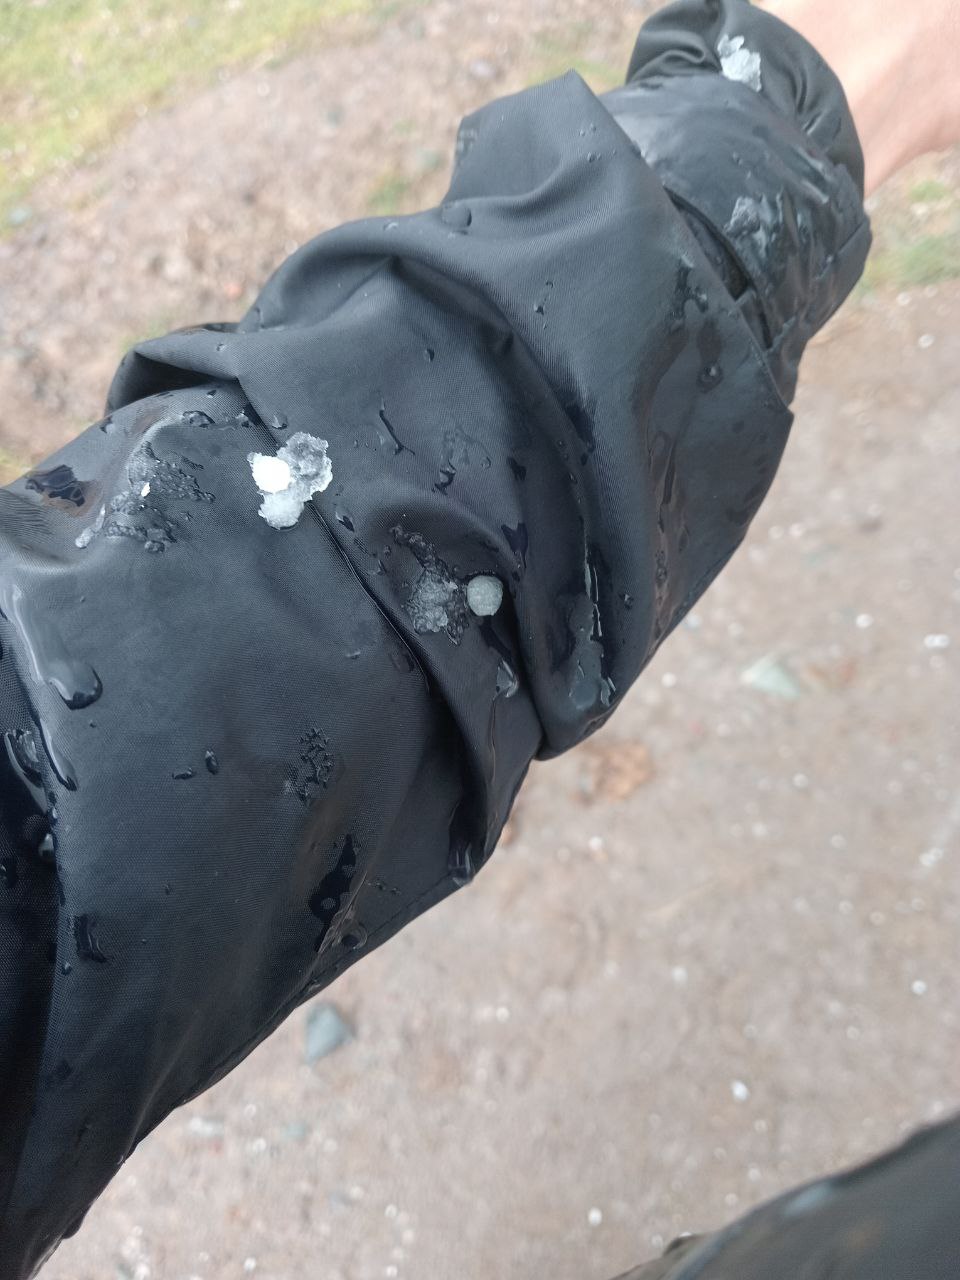 black nylon raincoat sleeve (being worn) extended out, with a few bits of ice on it